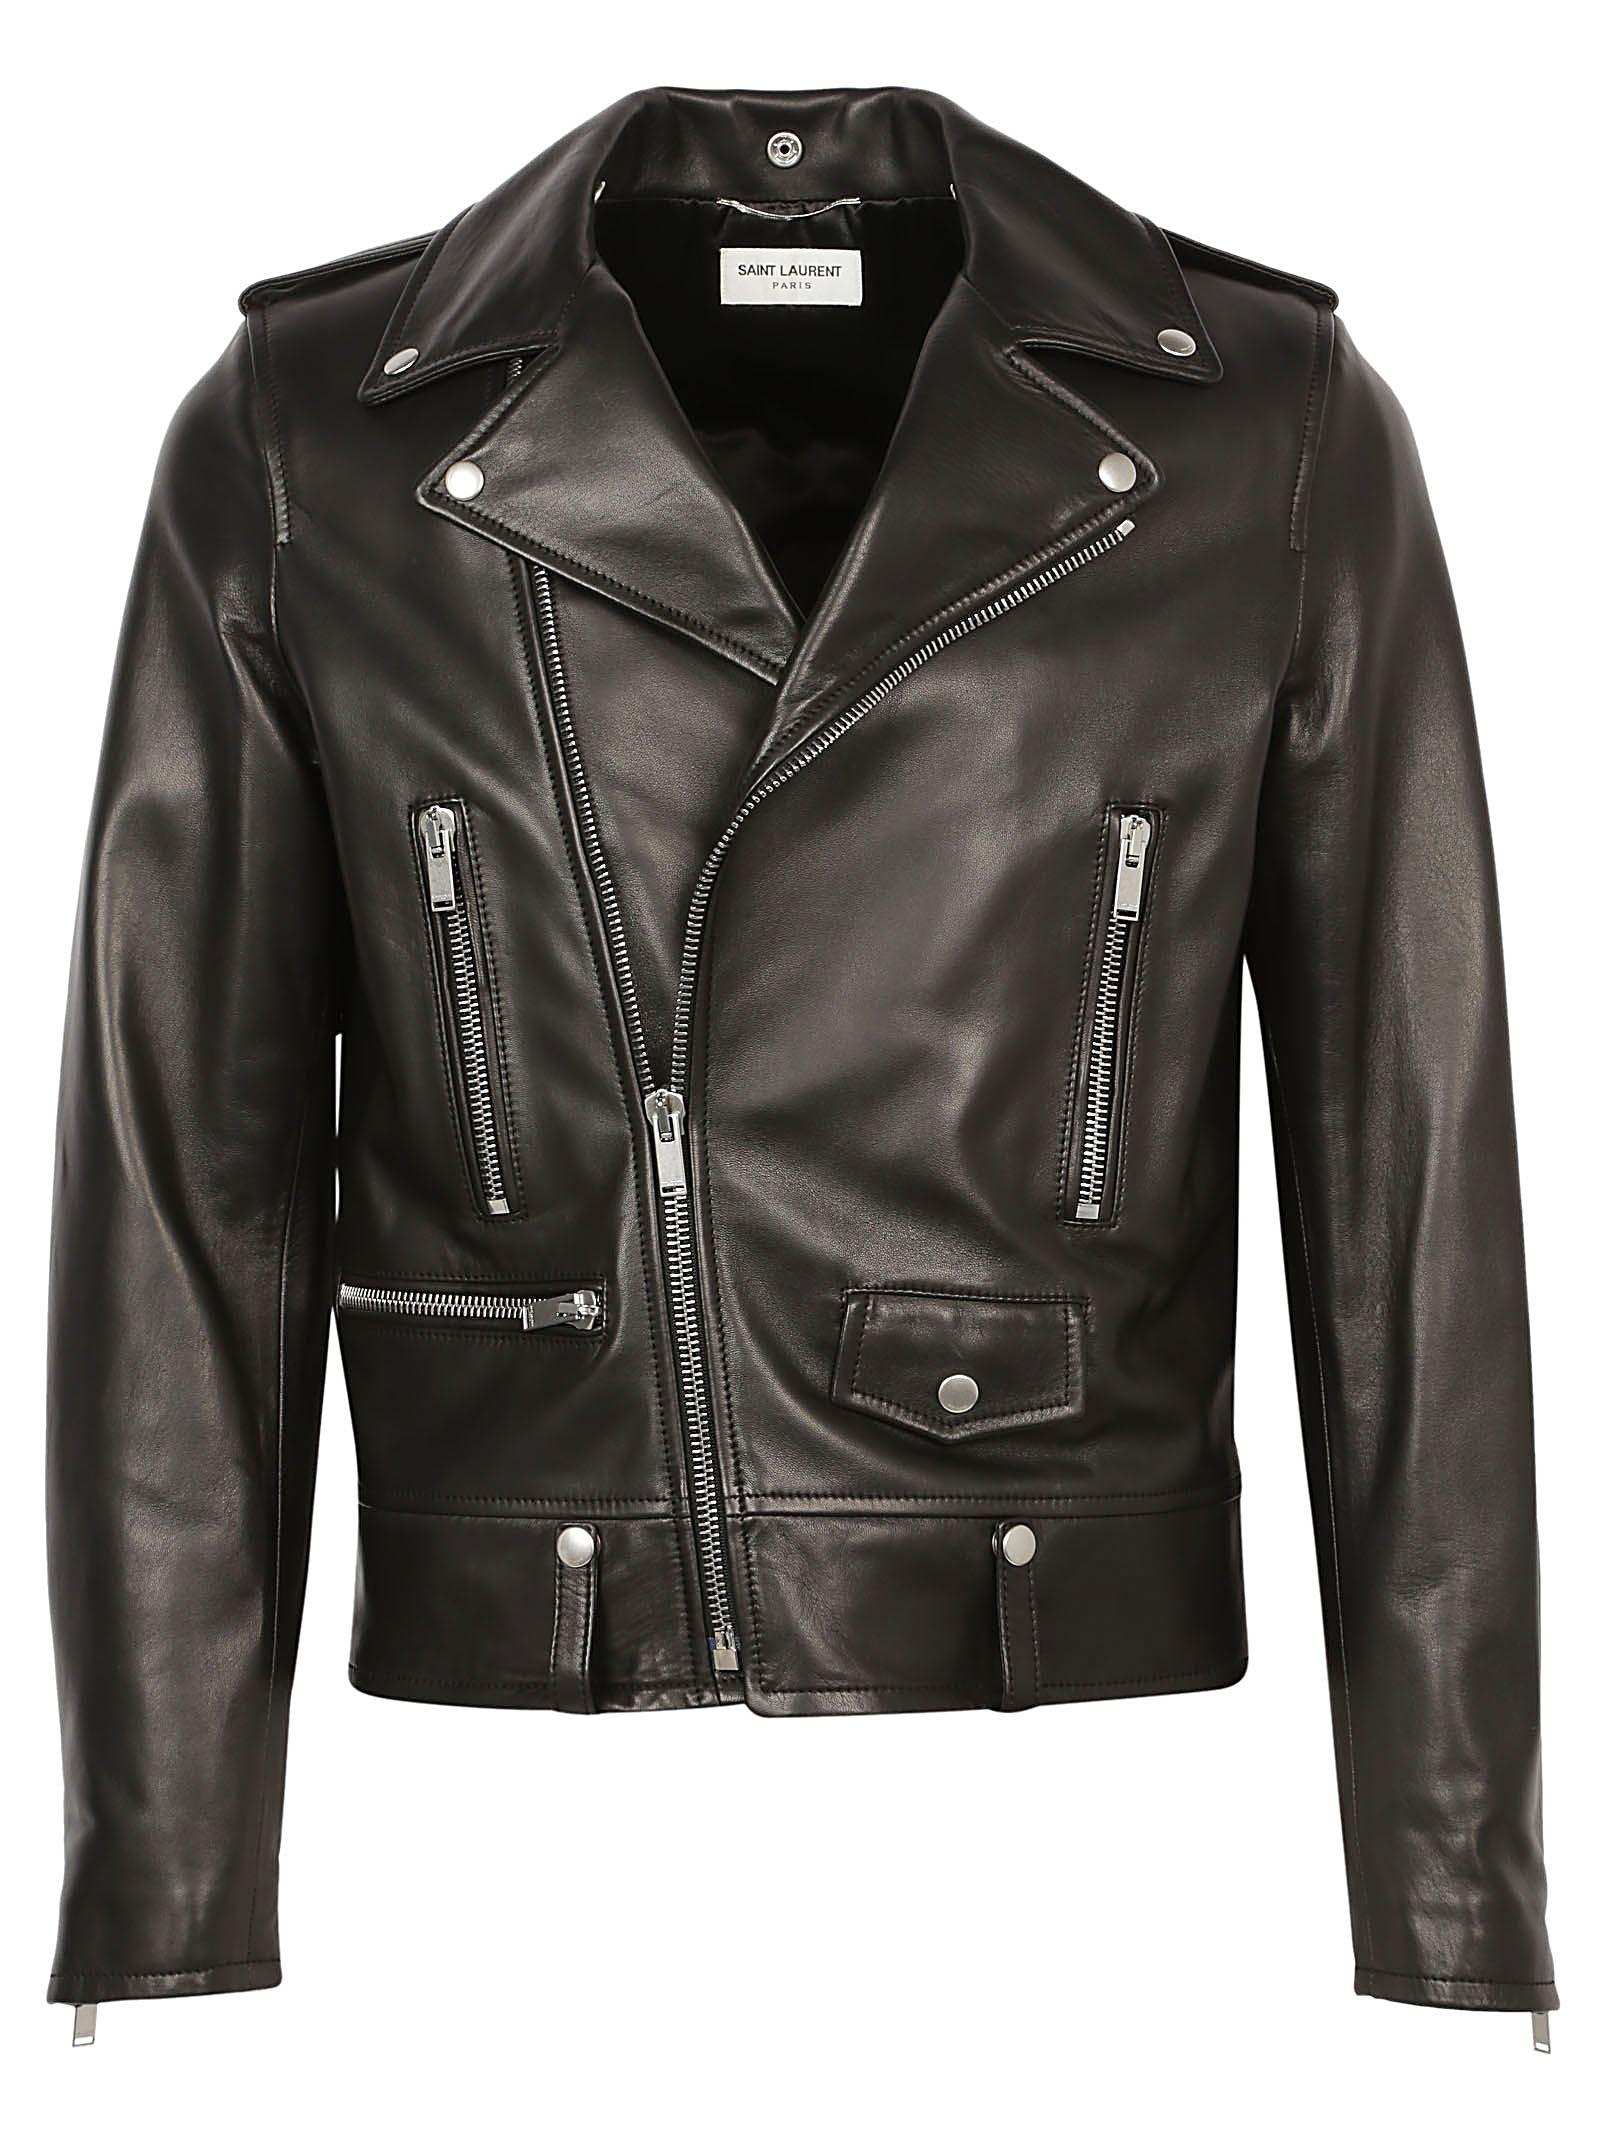 Saint Laurent Leather Classic Motorcycle Jacket in Black for Men - Lyst